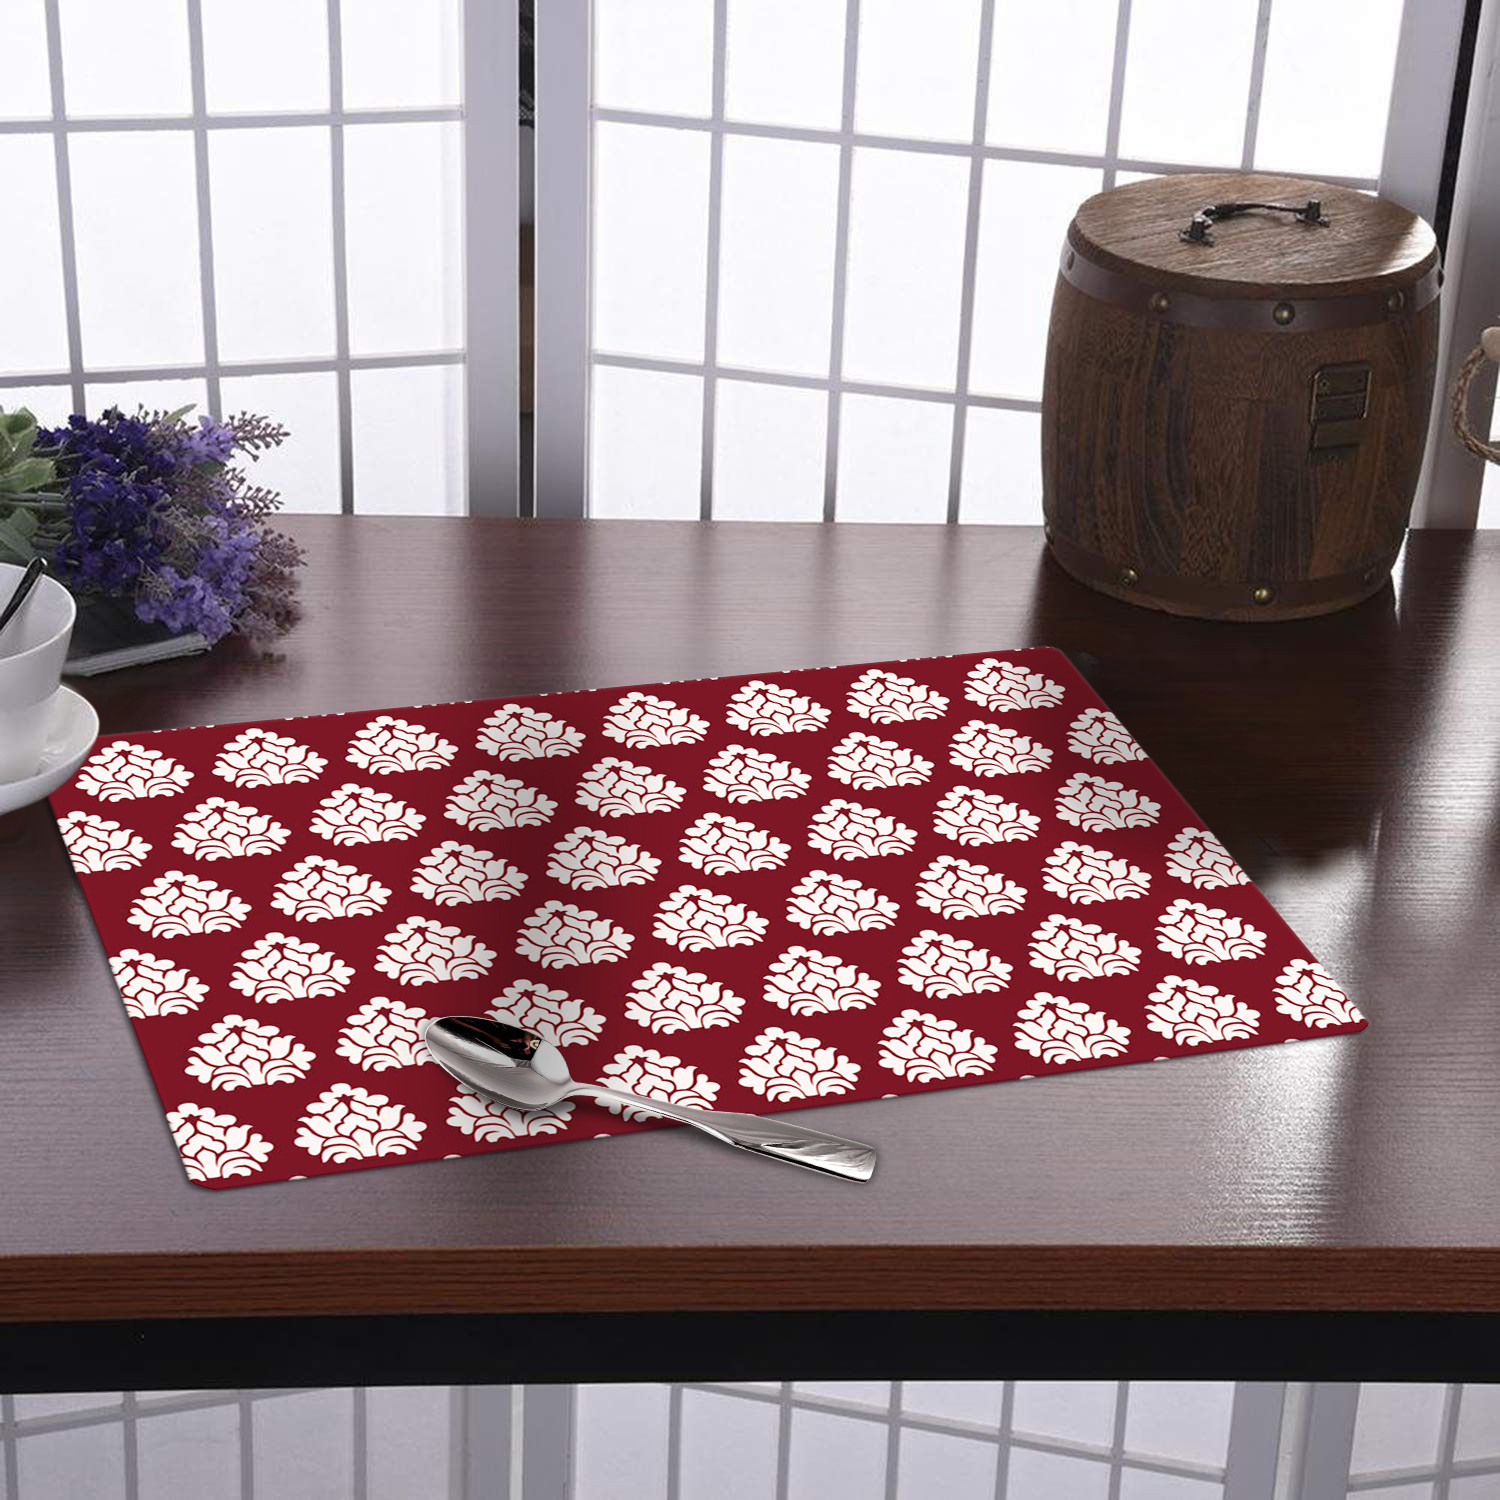 Kuber Industries Multiuses Flower Print PVC Table Placemat for kitchen, Dining Table Set of 6 (Maroon)